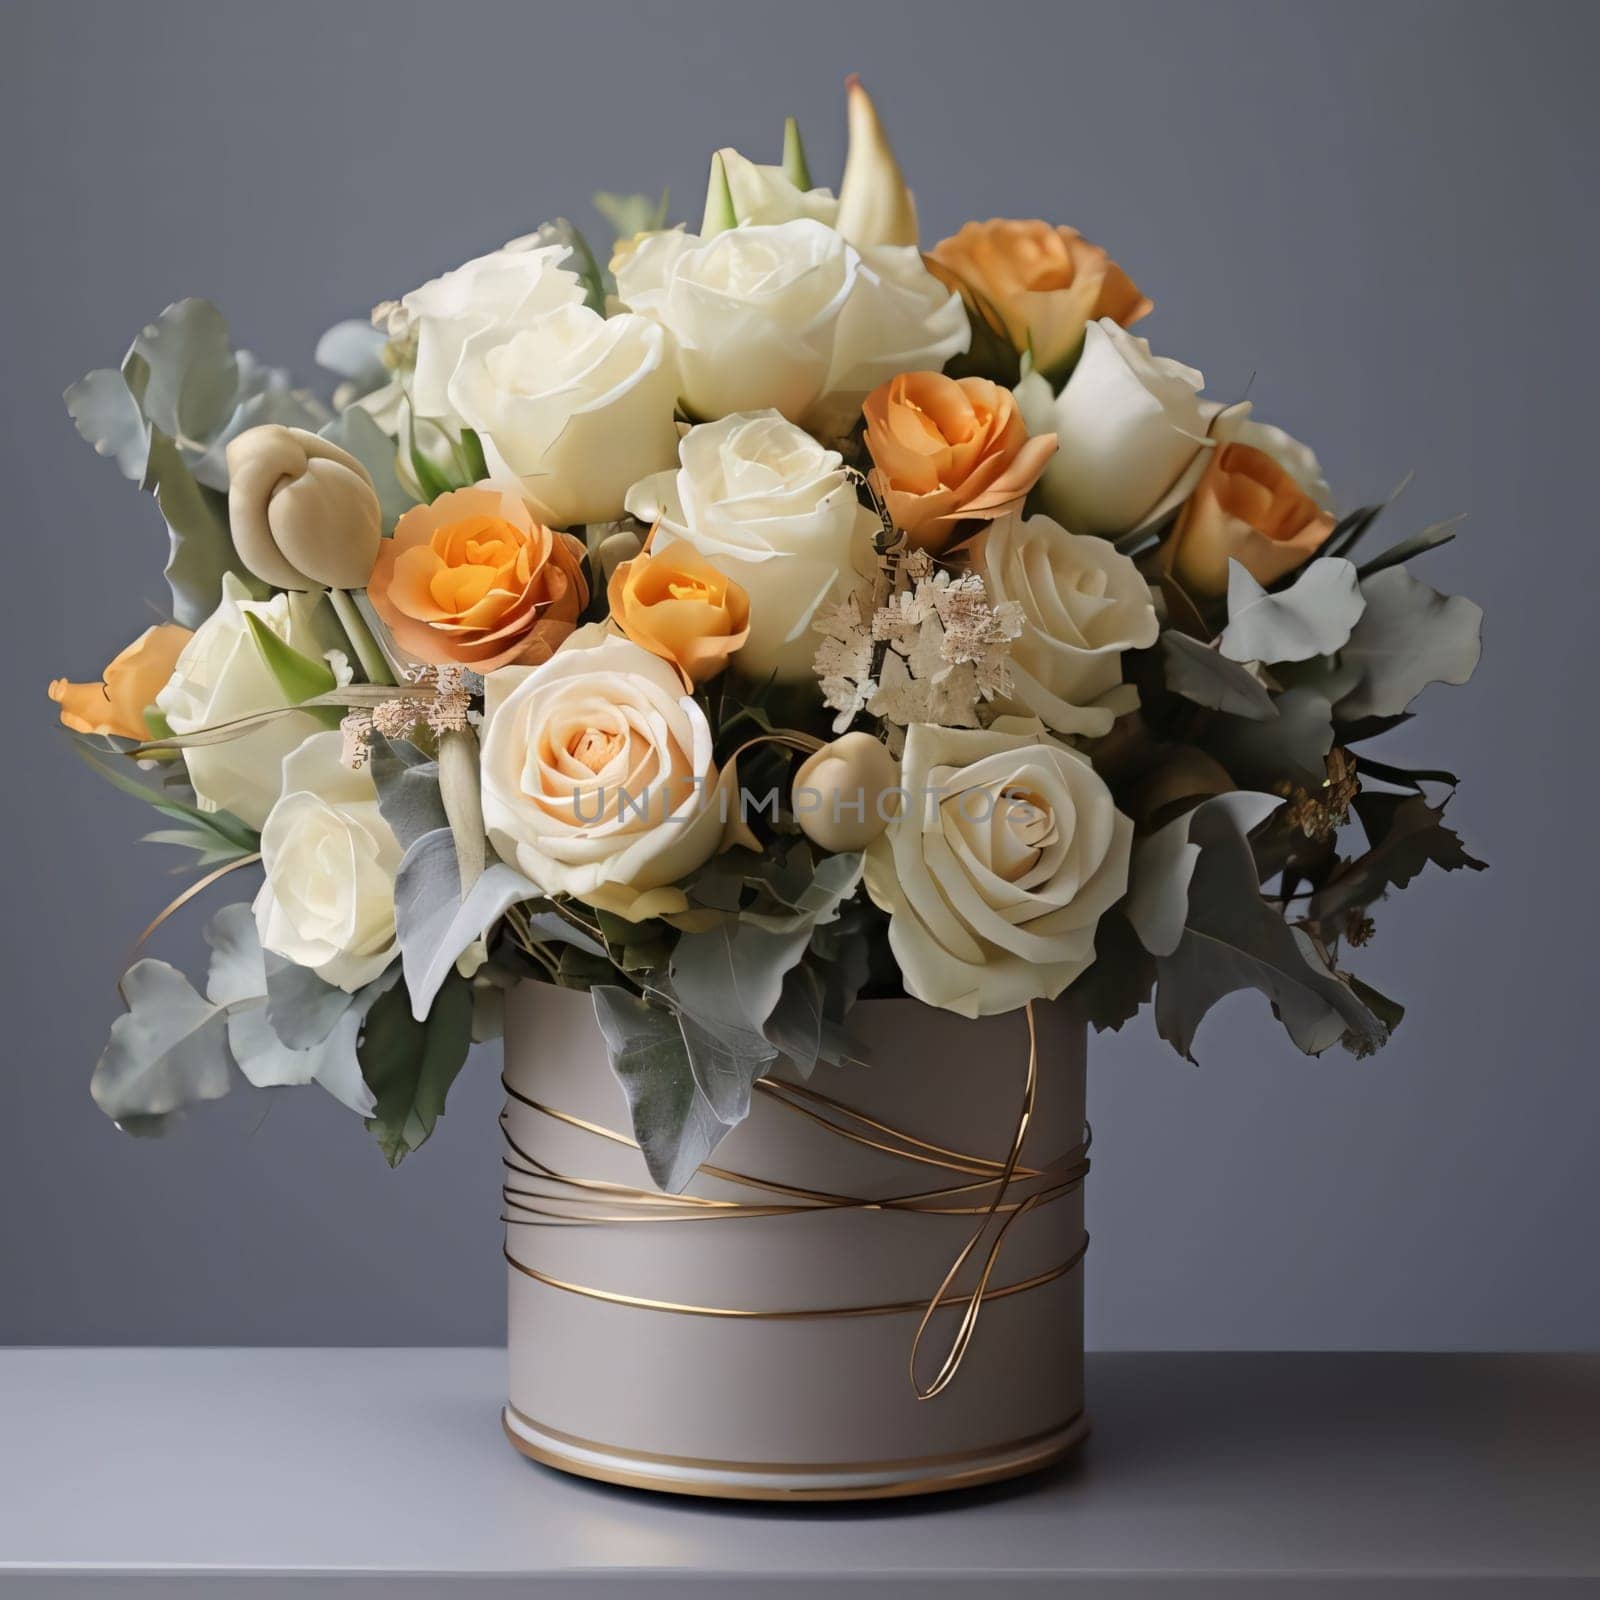 A bouquet of white and orange roses in an ornate gold vase on a gray background. Flowering flowers, a symbol of spring, new life. A joyful time of nature waking up to life.